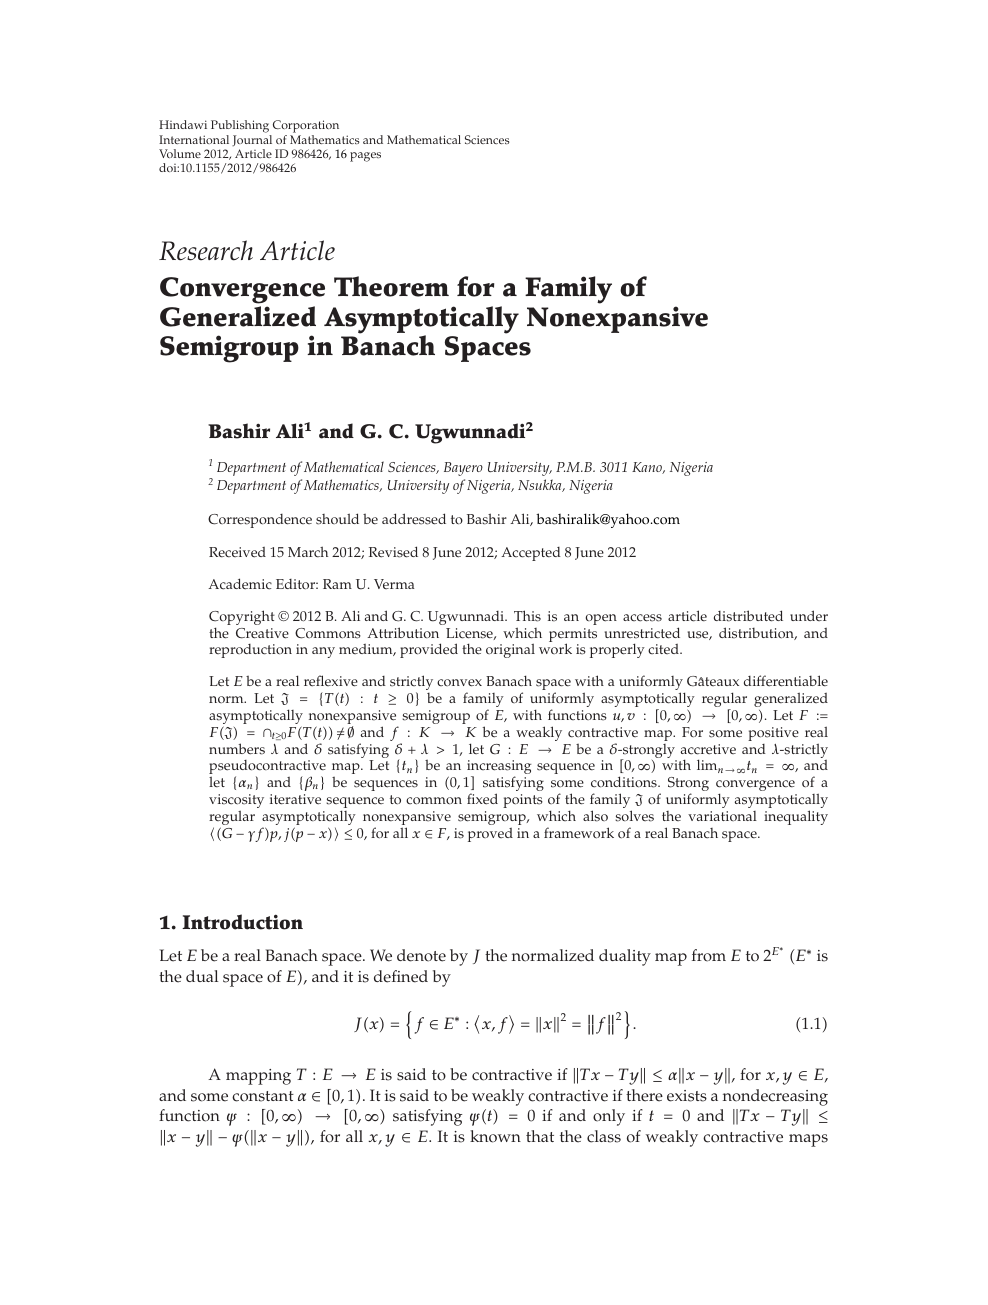 Convergence Theorem For A Family Of Generalized Asymptotically Nonexpansive Semigroup In Banach Spaces Topic Of Research Paper In Mathematics Download Scholarly Article Pdf And Read For Free On Cyberleninka Open Science